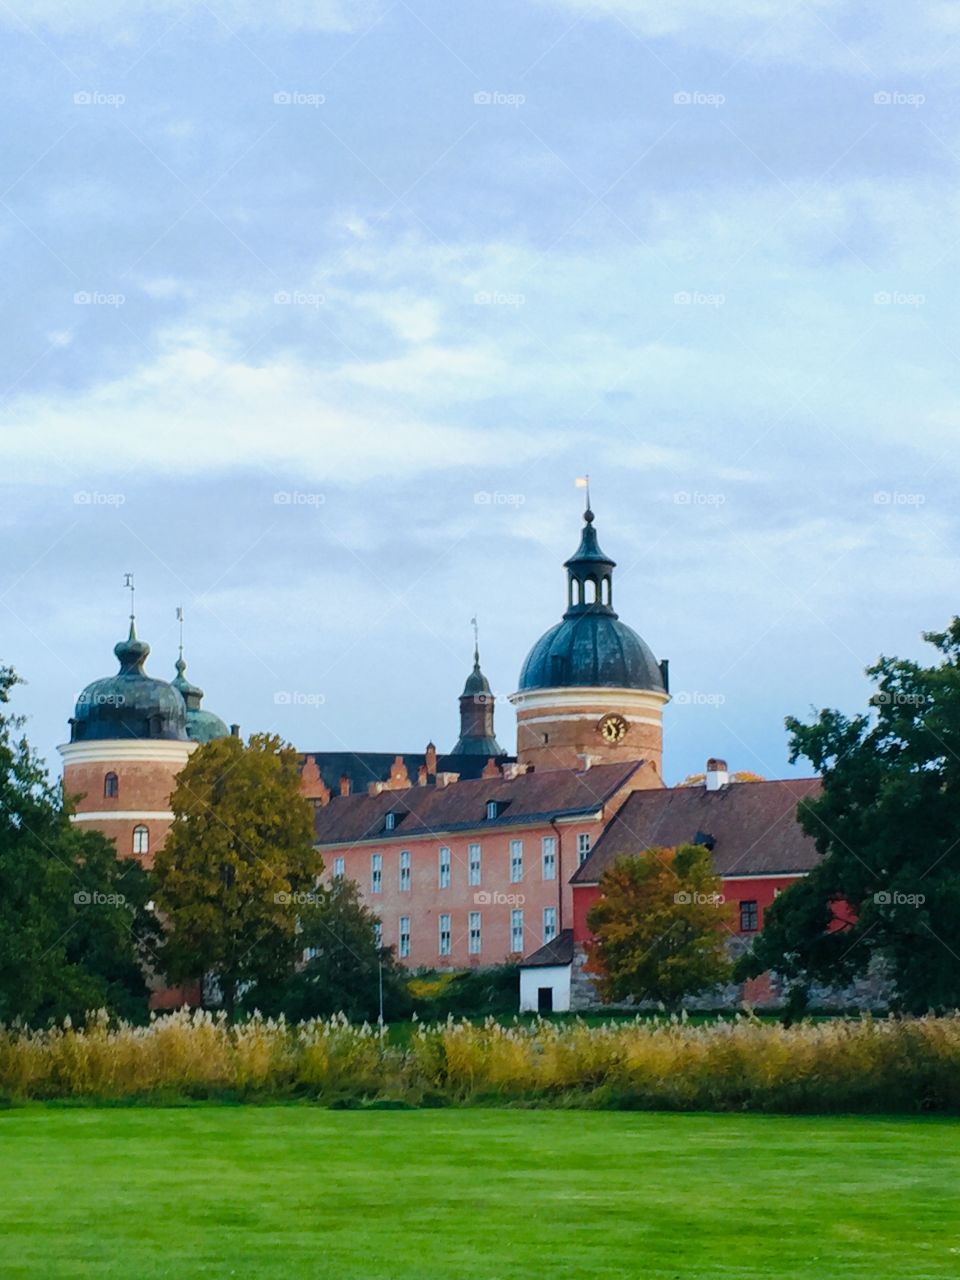 On the shores of Lake Mälaren, Gripsholm Castle towers powerfully and fairytale-like over the idyllic small town of Mariefred in Södermanland.